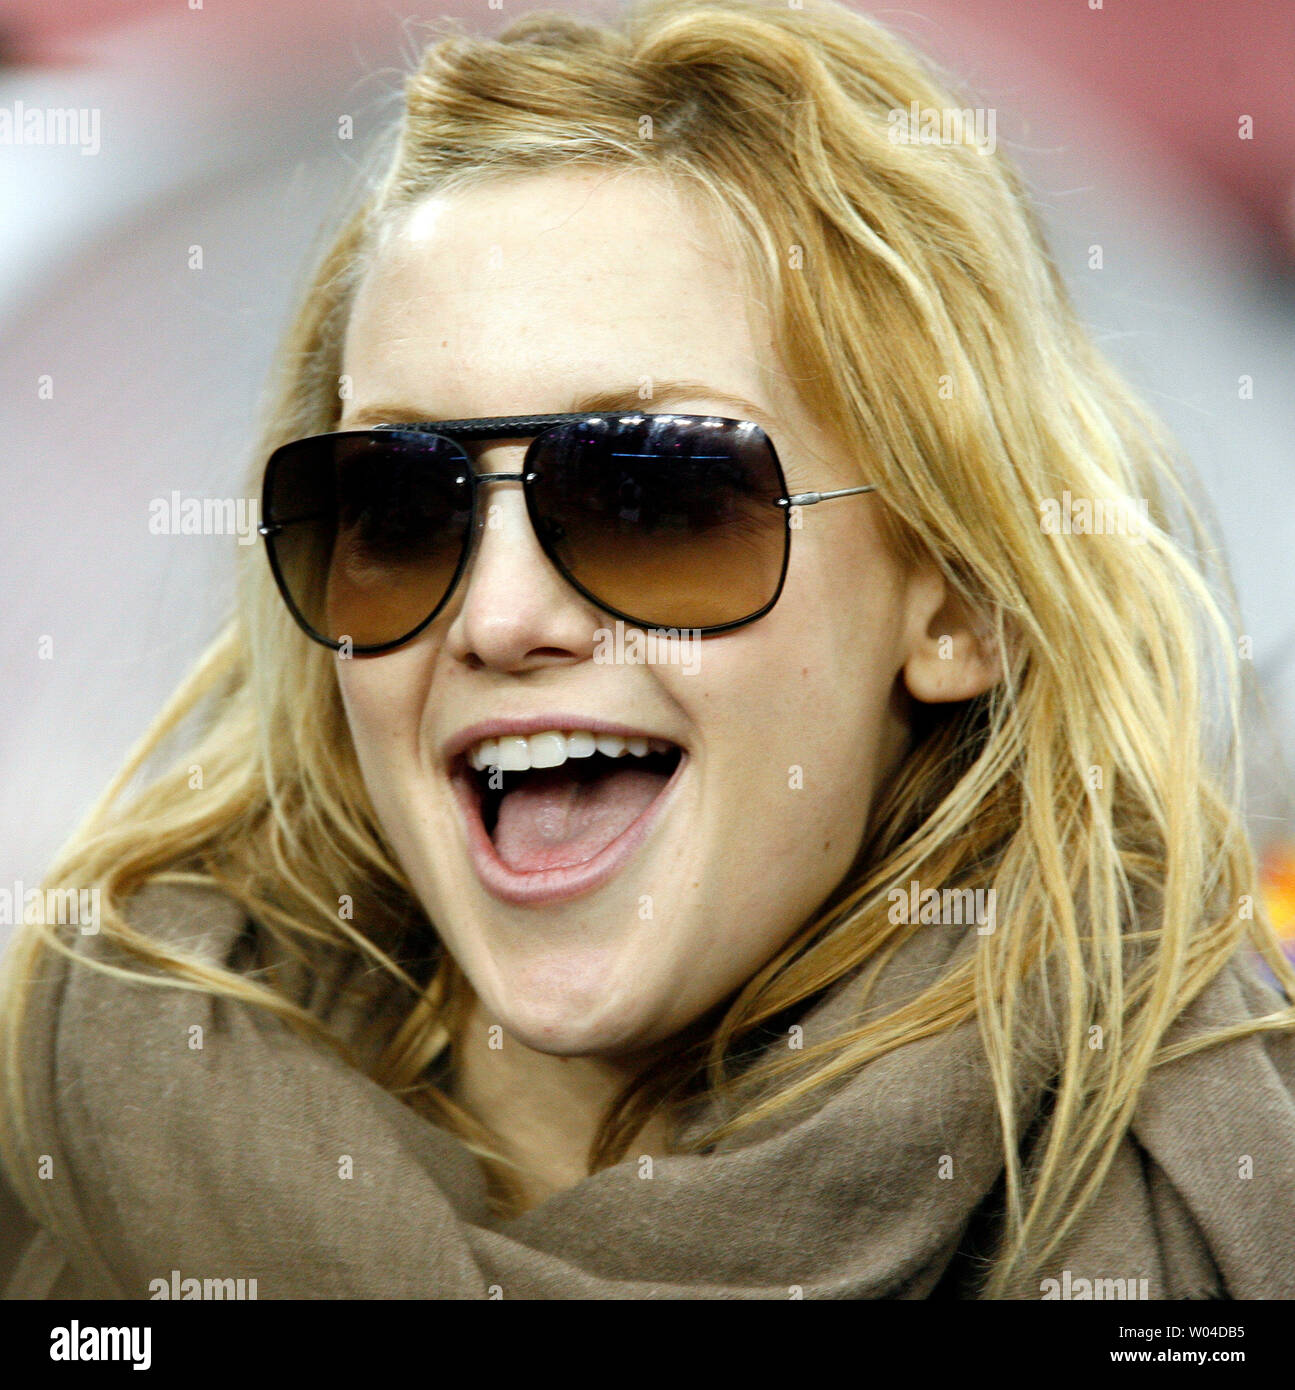 Actress Kate Hudson watches pre-game activities on the field prior to Super Bowl XLII featuring the New York Giants vs. the New England Patriots at University of Phoenix Stadium in Glendale, Arizona on February 3, 2008.  (UPI Photo/Gary C. Caskey) Stock Photo